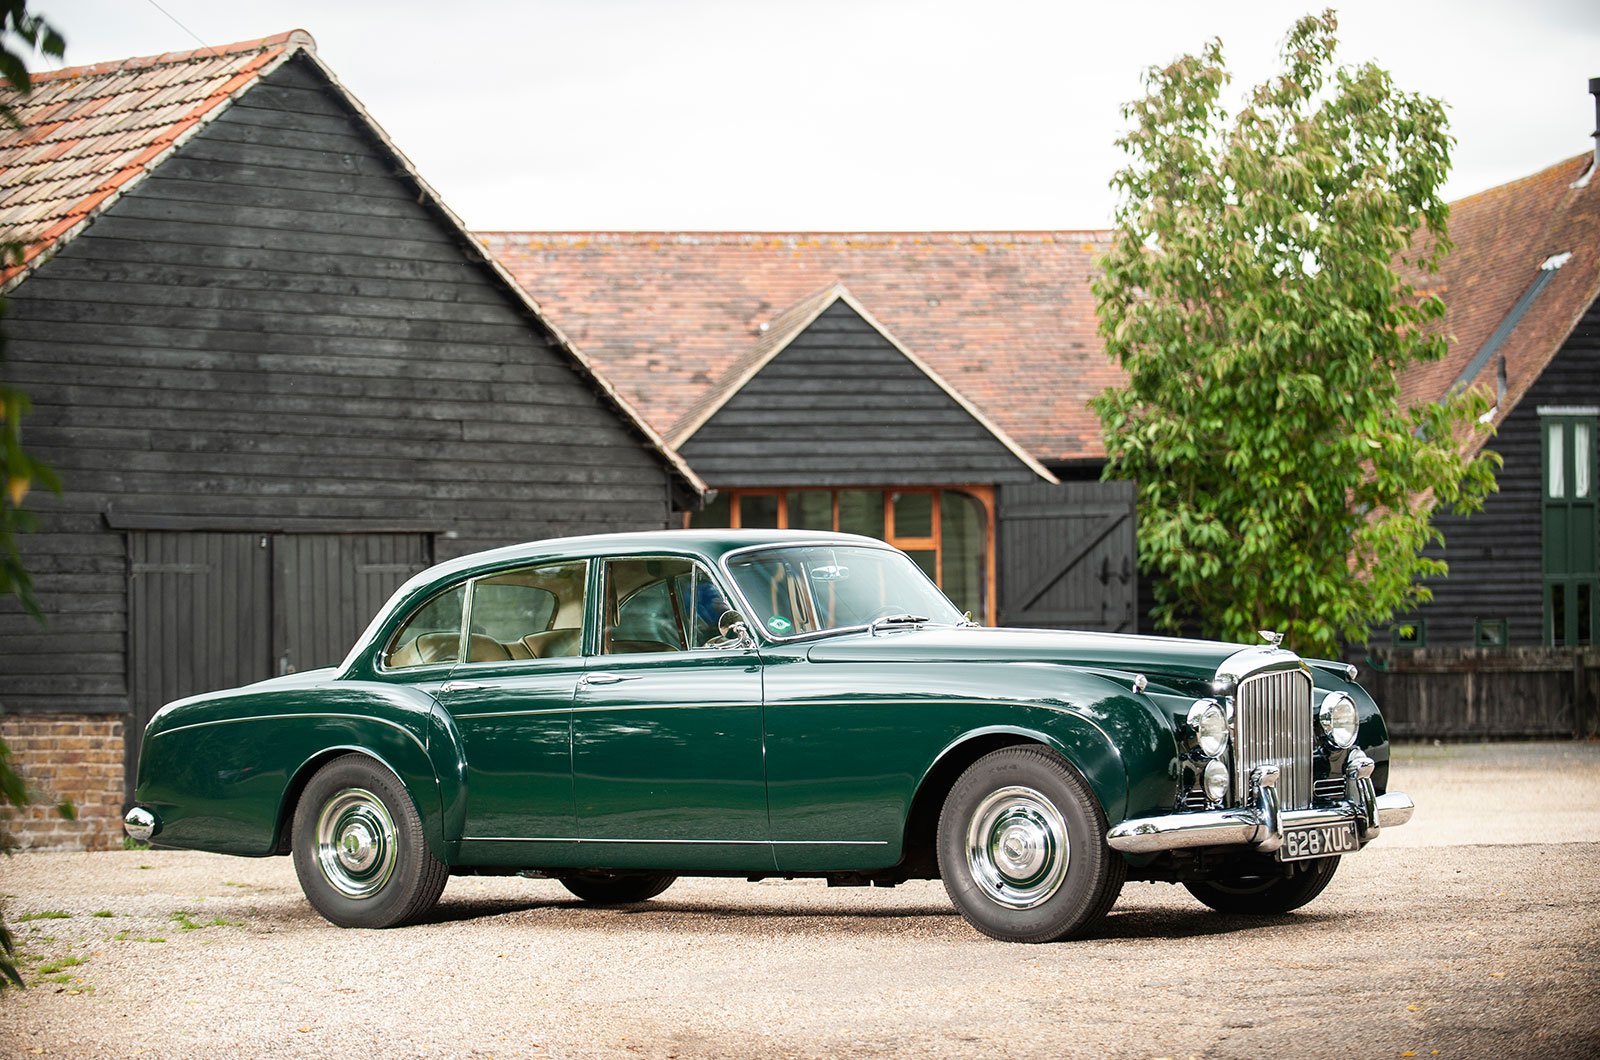 <p><span>All Bentley Continentals came with two doors, but for those wanting an even more special S-Series with four doors, there was a <strong>Flying Spur </strong>option from 1957. Made by independent coachbuilder <strong>HJ Mulliner </strong>(which merged with Park ward in 1963), these cars have become hugely collectible in recent years.</span></p>